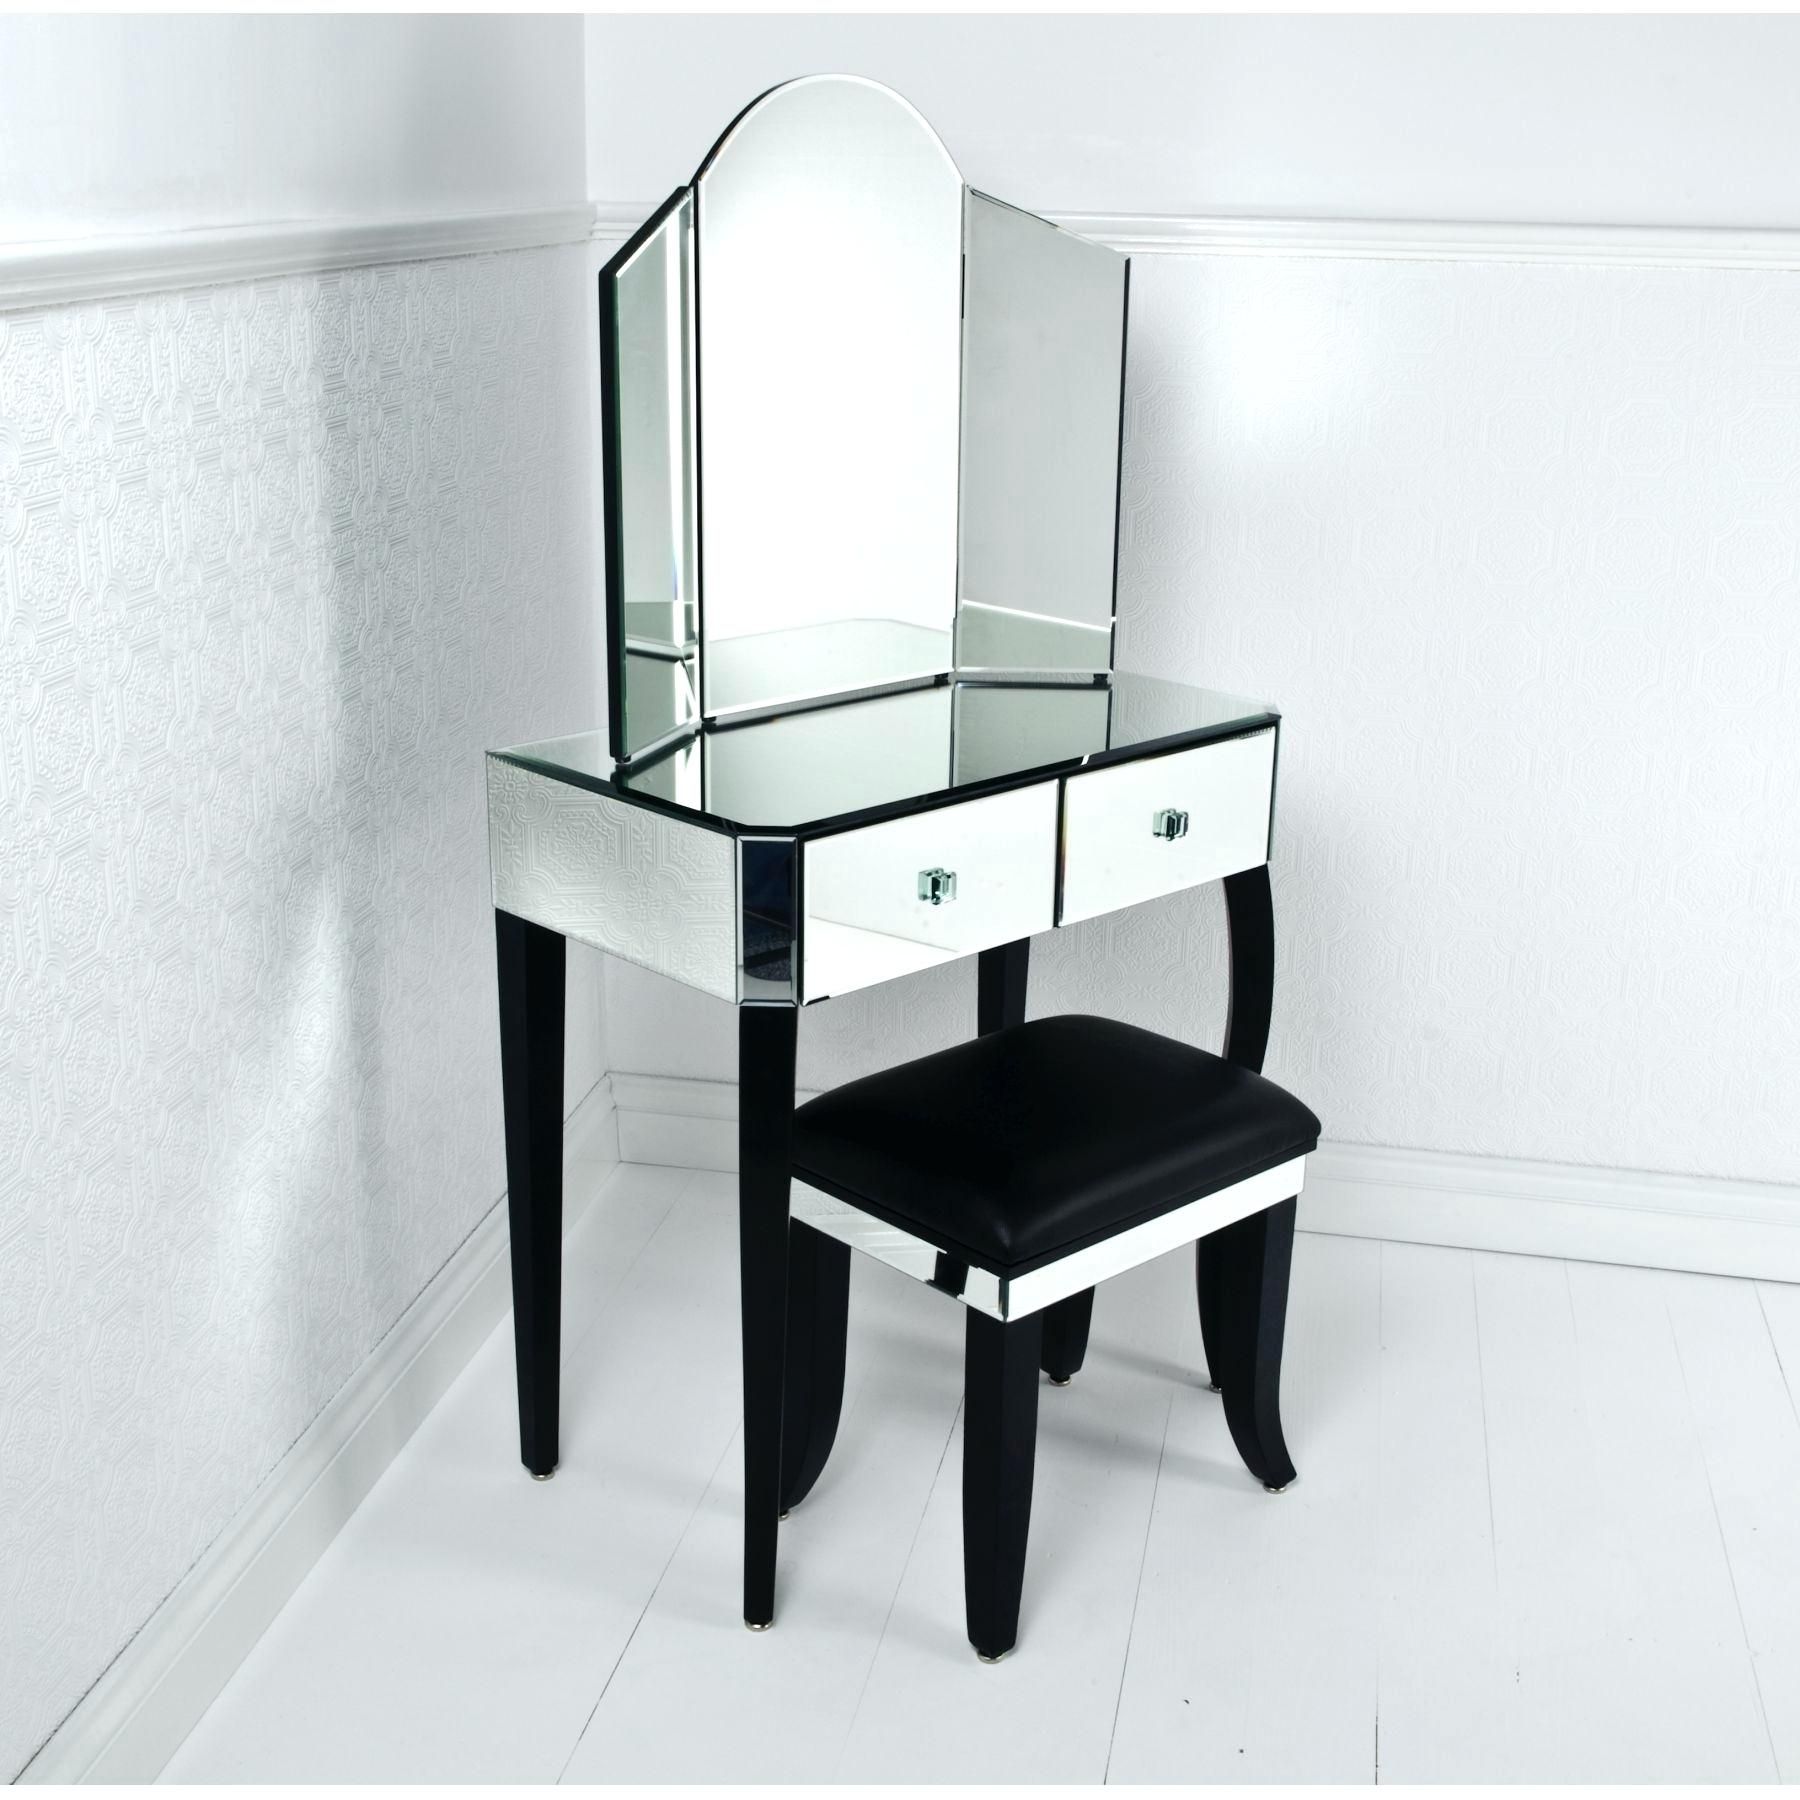 Mirror Dressers And Nightstands Architectural Mirrored Furniture Intended For Very Large Round Mirror (Photo 3 of 15)